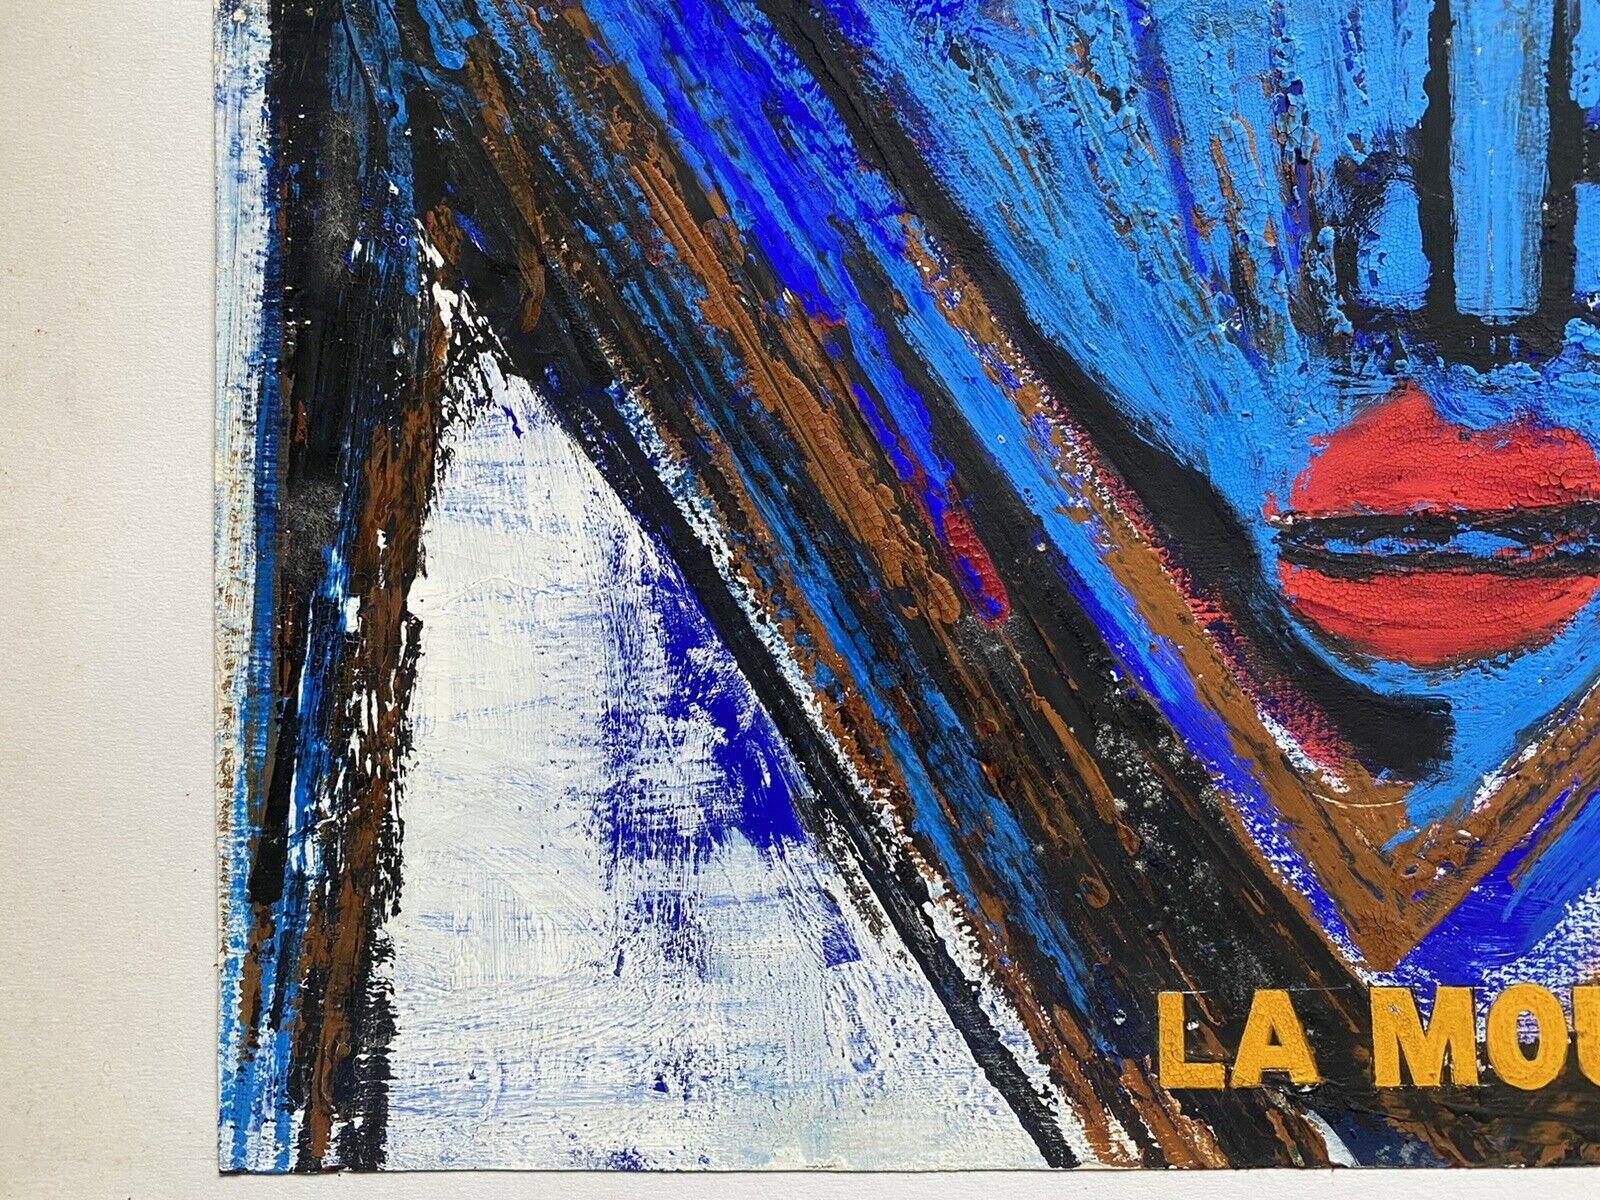 CLAUDE LAGOUCHE (1943-2020) ORIGNAL 1970'S FRENCH PSYCHEDELIC ABSTRACT PAINTING - Abstract Painting by Claude Lagouche